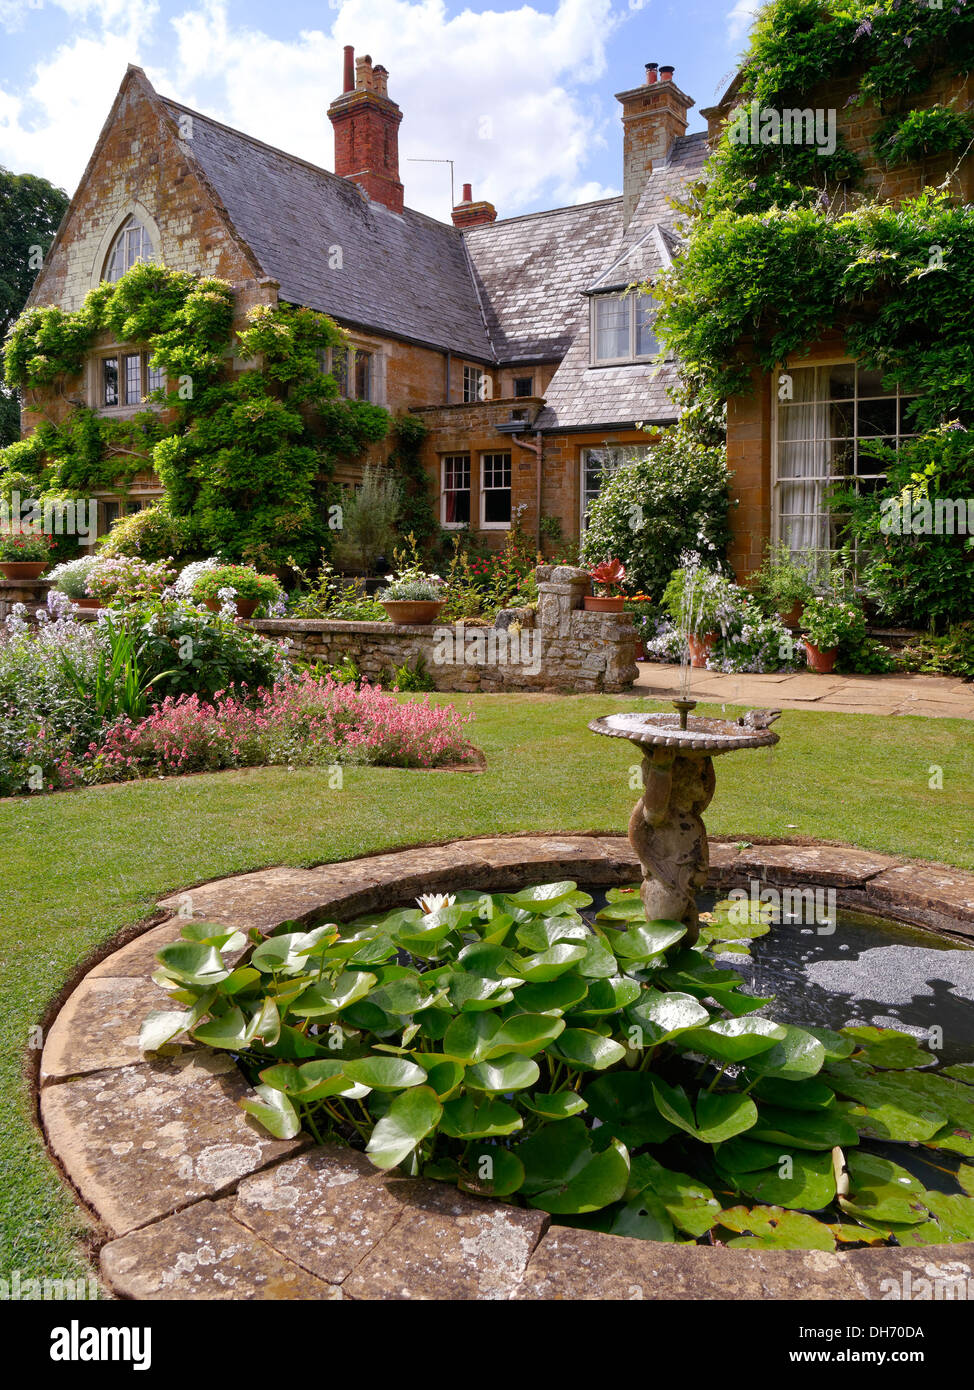 Small round ornamental garden pond and fountain set in gardens of Coton Manor House, Coton, Northamptonshire, UK. Stock Photo